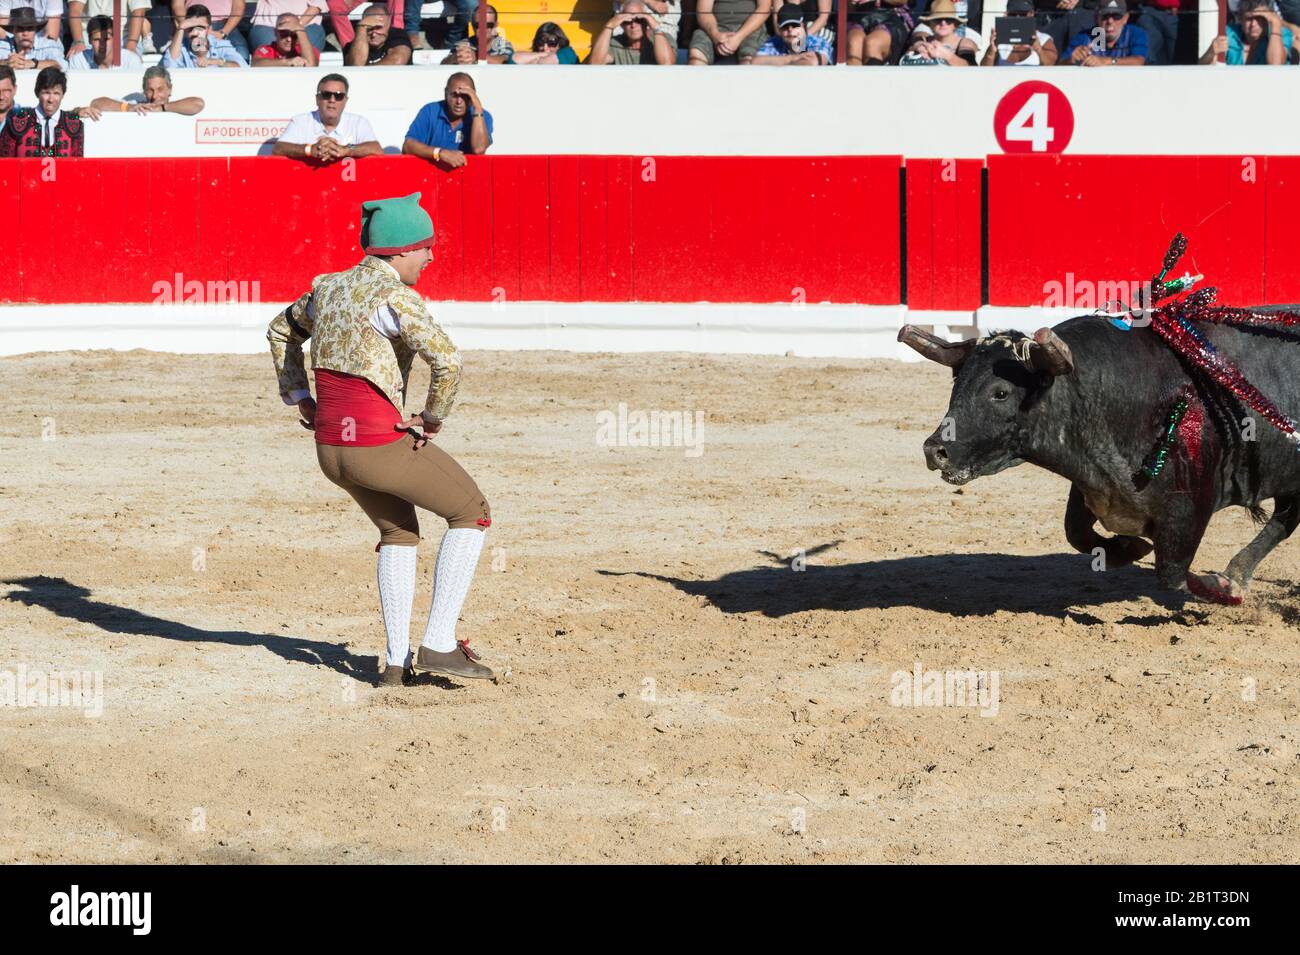 Bullfight in Alcochete. Forcado challenging a bull and trying to stop it, Bulls are not killed during the bullfight, Alcochete, Setubal Province, Port Stock Photo